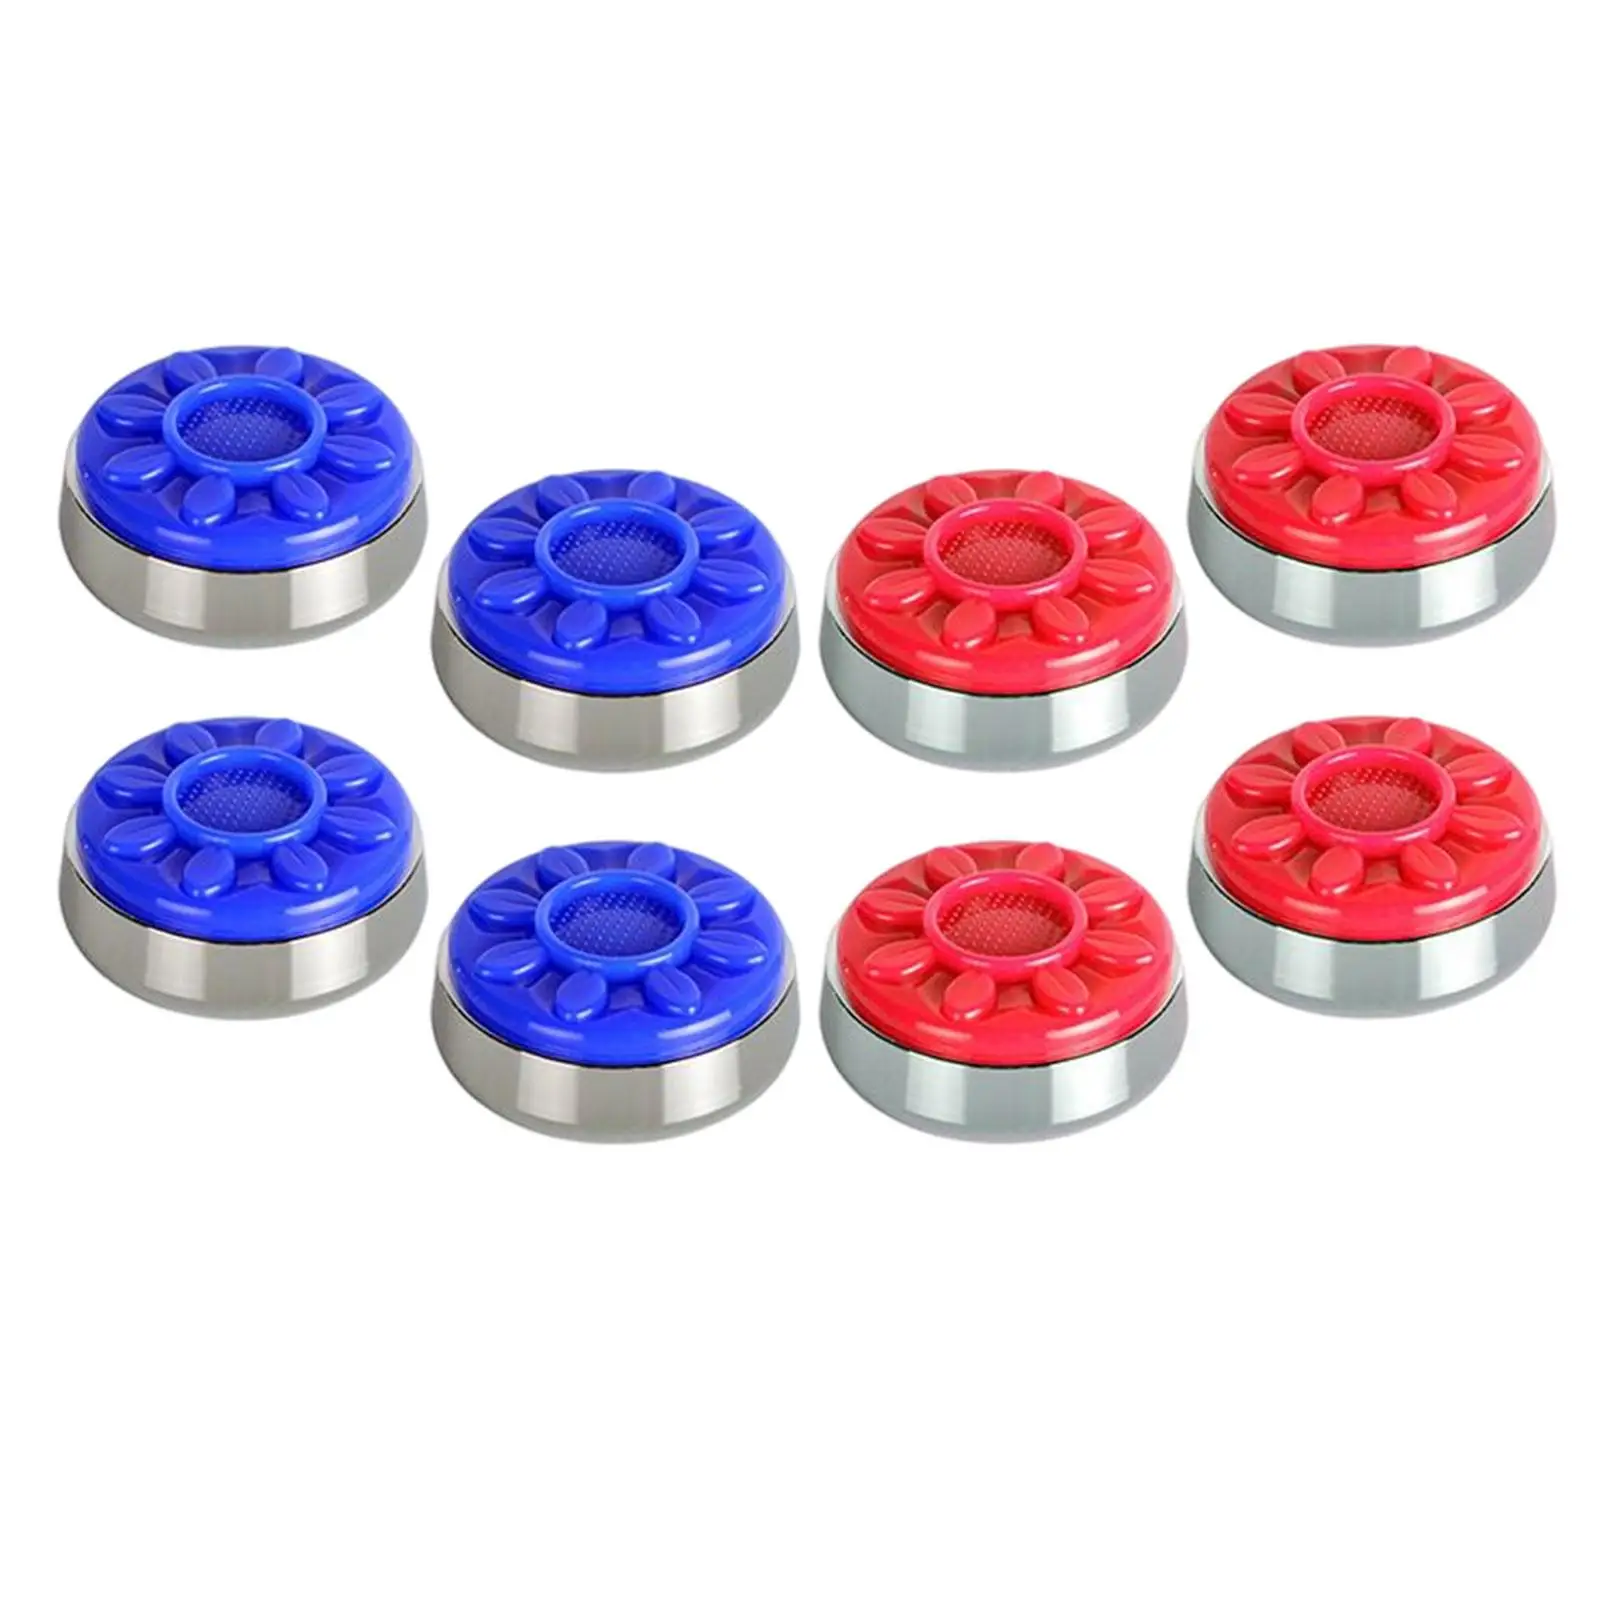 

8x Large Shuffleboard Pucks Replacements Family Games Multiple Color Tabletop Game Pucks 58mm Shuffleboard Accessories